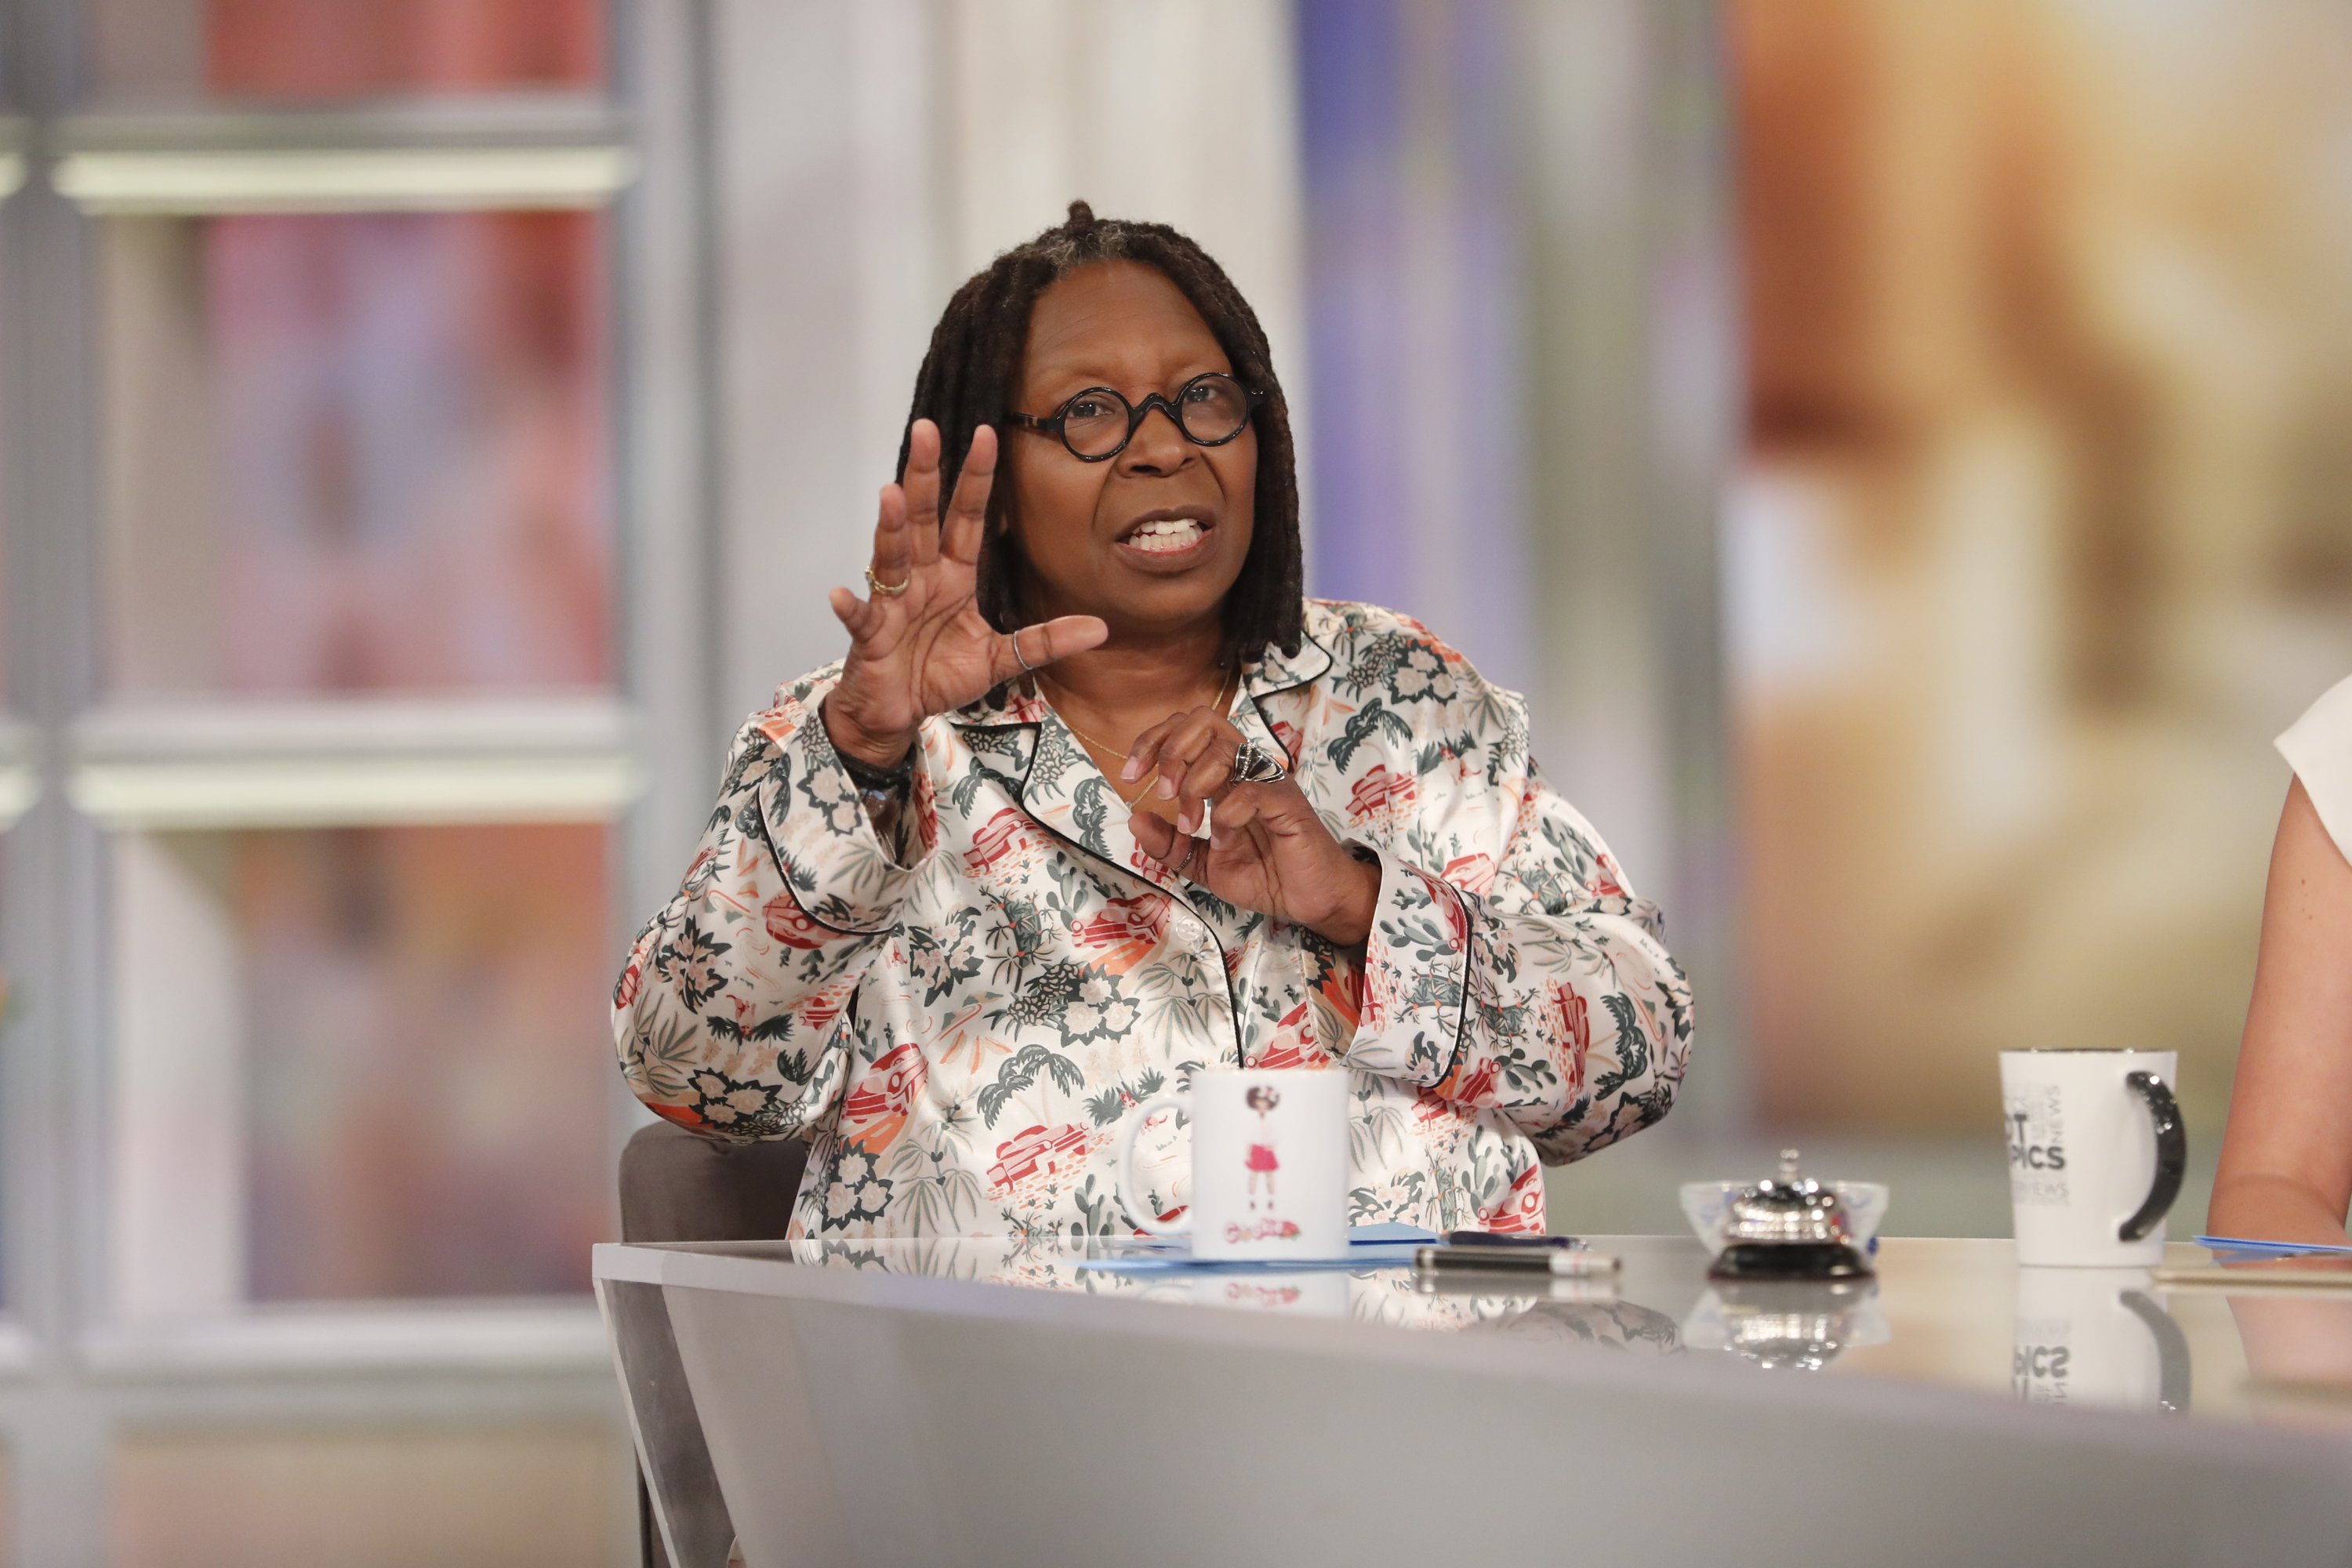 Television host Whoopi Goldberg during Season 21 of the ABC talk show, "The View," on October 17, 2018. | Source: Getty Images